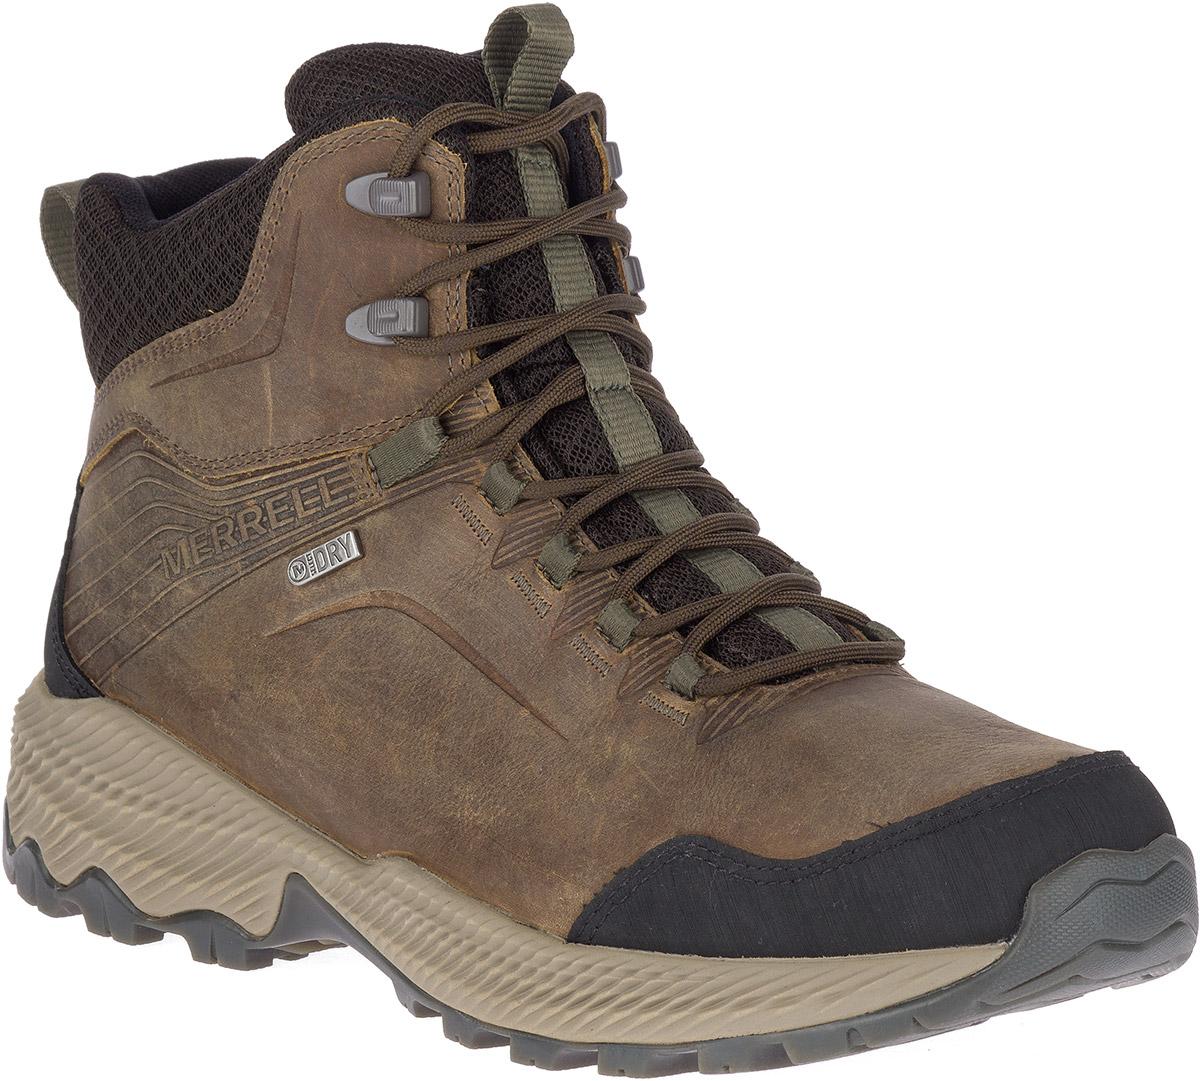 Merrell Forestbound Waterproof Mid Hiking Boots - Cloudy